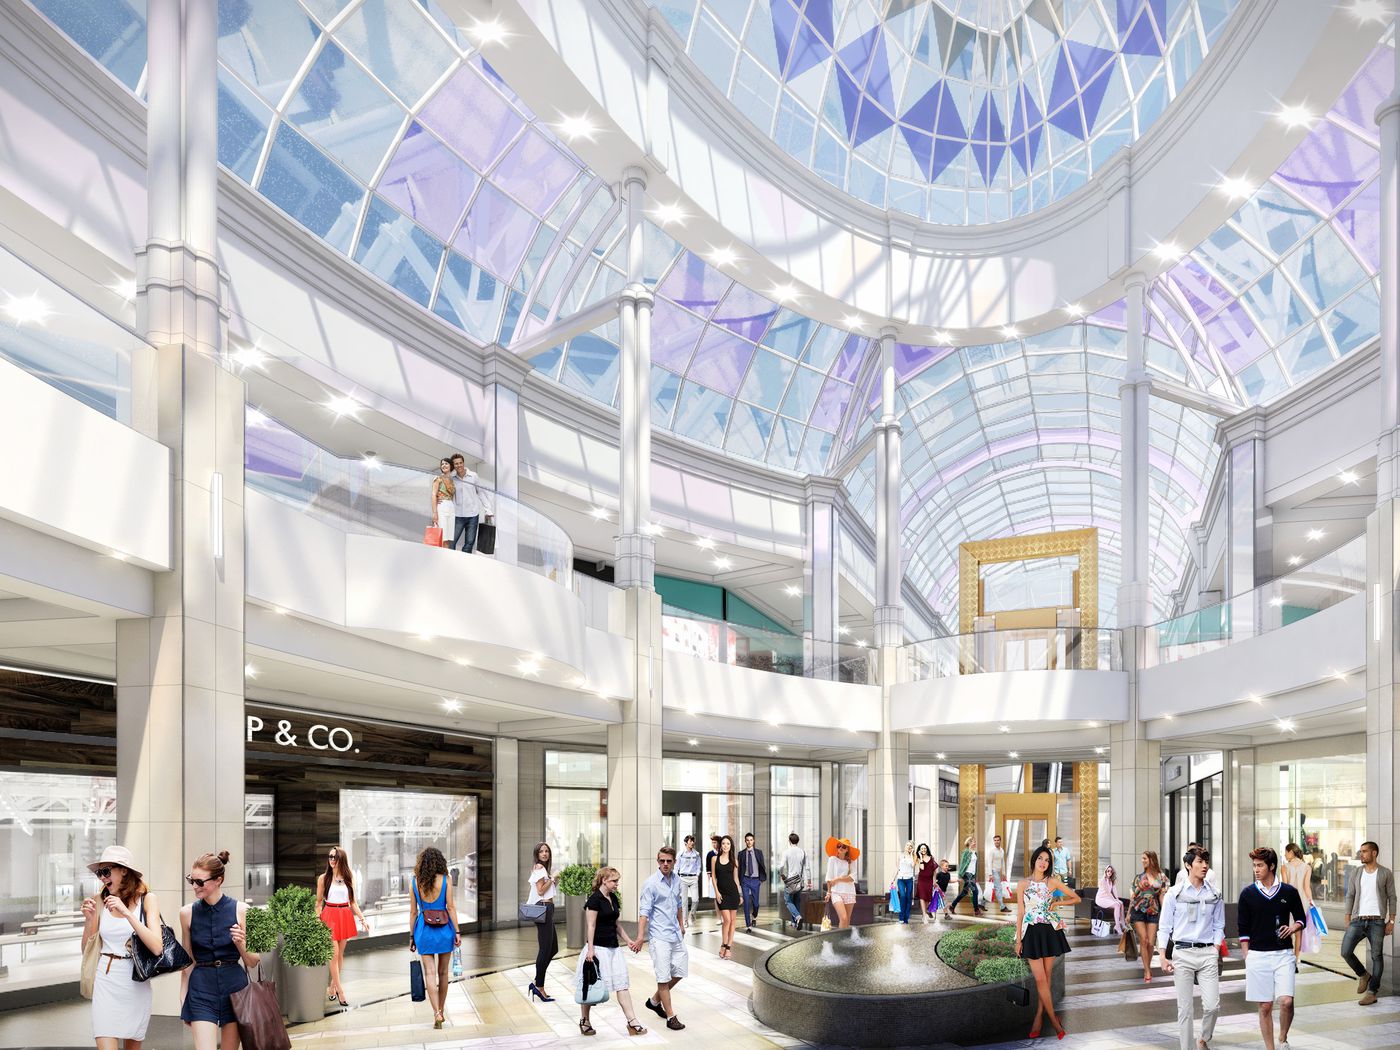 King of Prussia Mall plans multimillion-dollar renovations - Curbed Philly